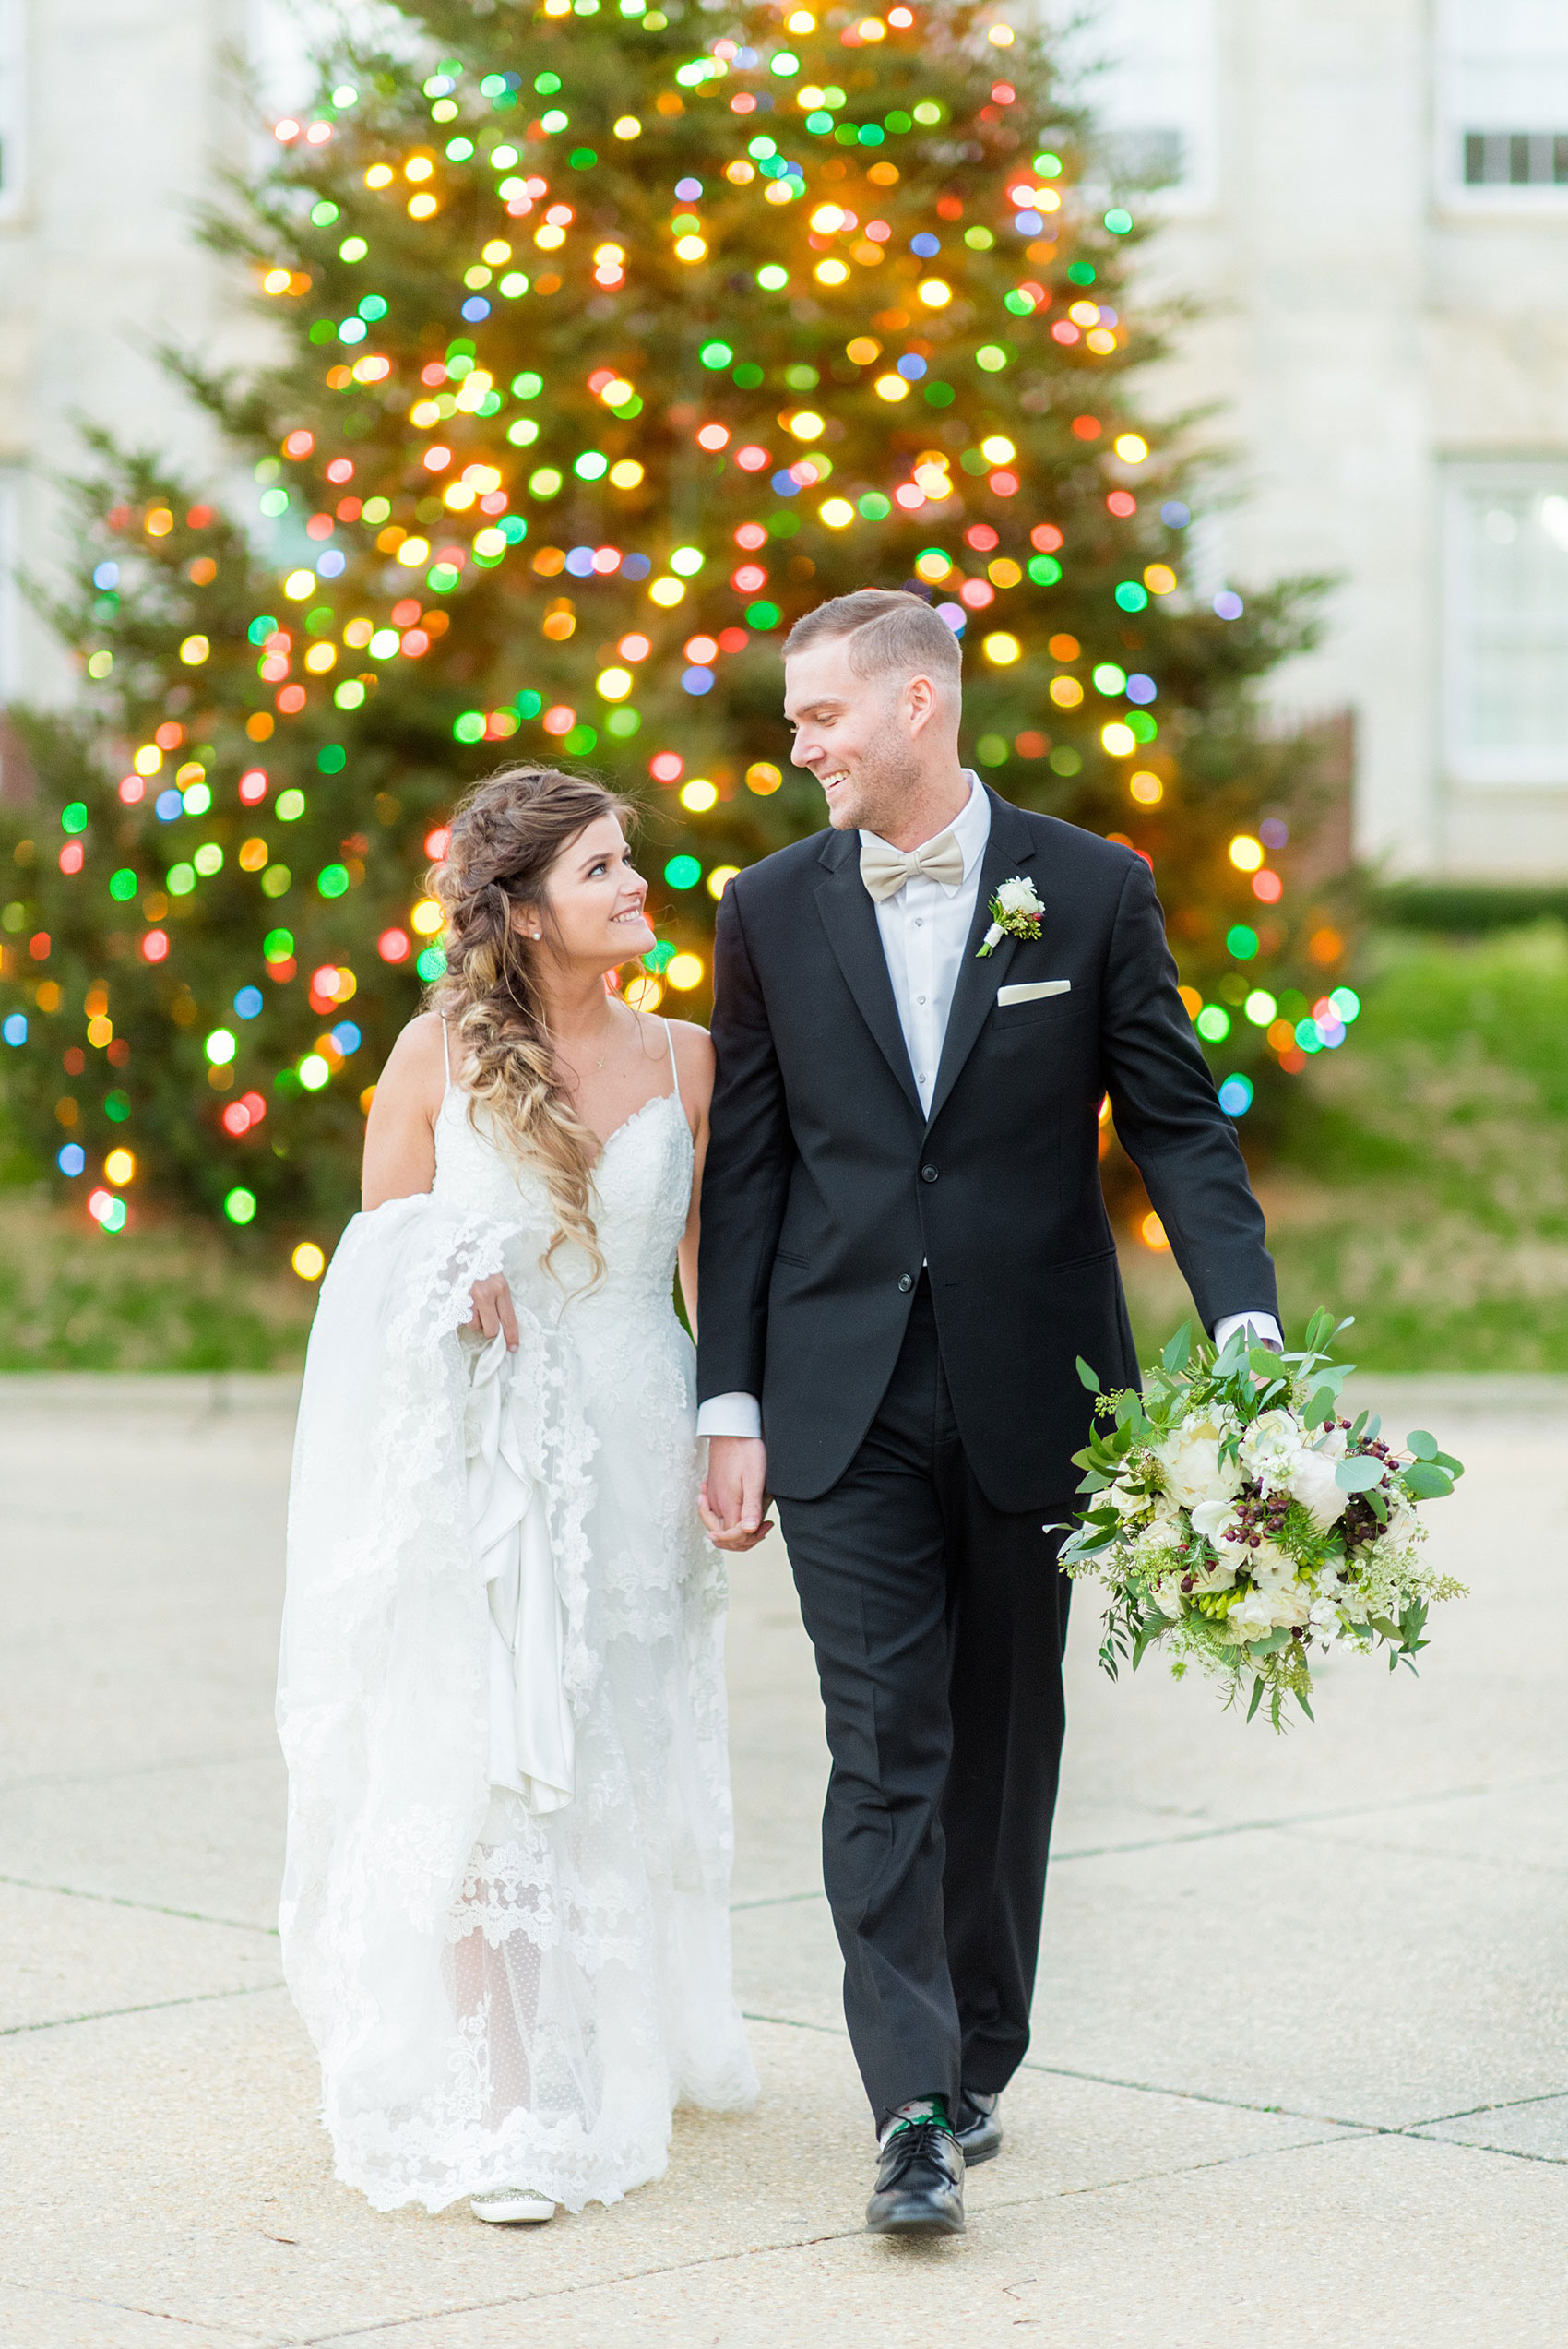 Pictures from a holiday inspired wedding in downtown Raleigh, North Carolina by Mikkel Paige Photography. The bride and groom took outdoor portraits by the capital with the Christmas lights twinkling behind them. She had a beautiful goddess fishtail braid hair style and lace gown. Click through for more ideas from a beautiful celebration, including details + decor photos in a green + gold decor palette for their reception. #mikkelpaige #raleighweddingphotographer #downtownRaleigh #brideandgroom 